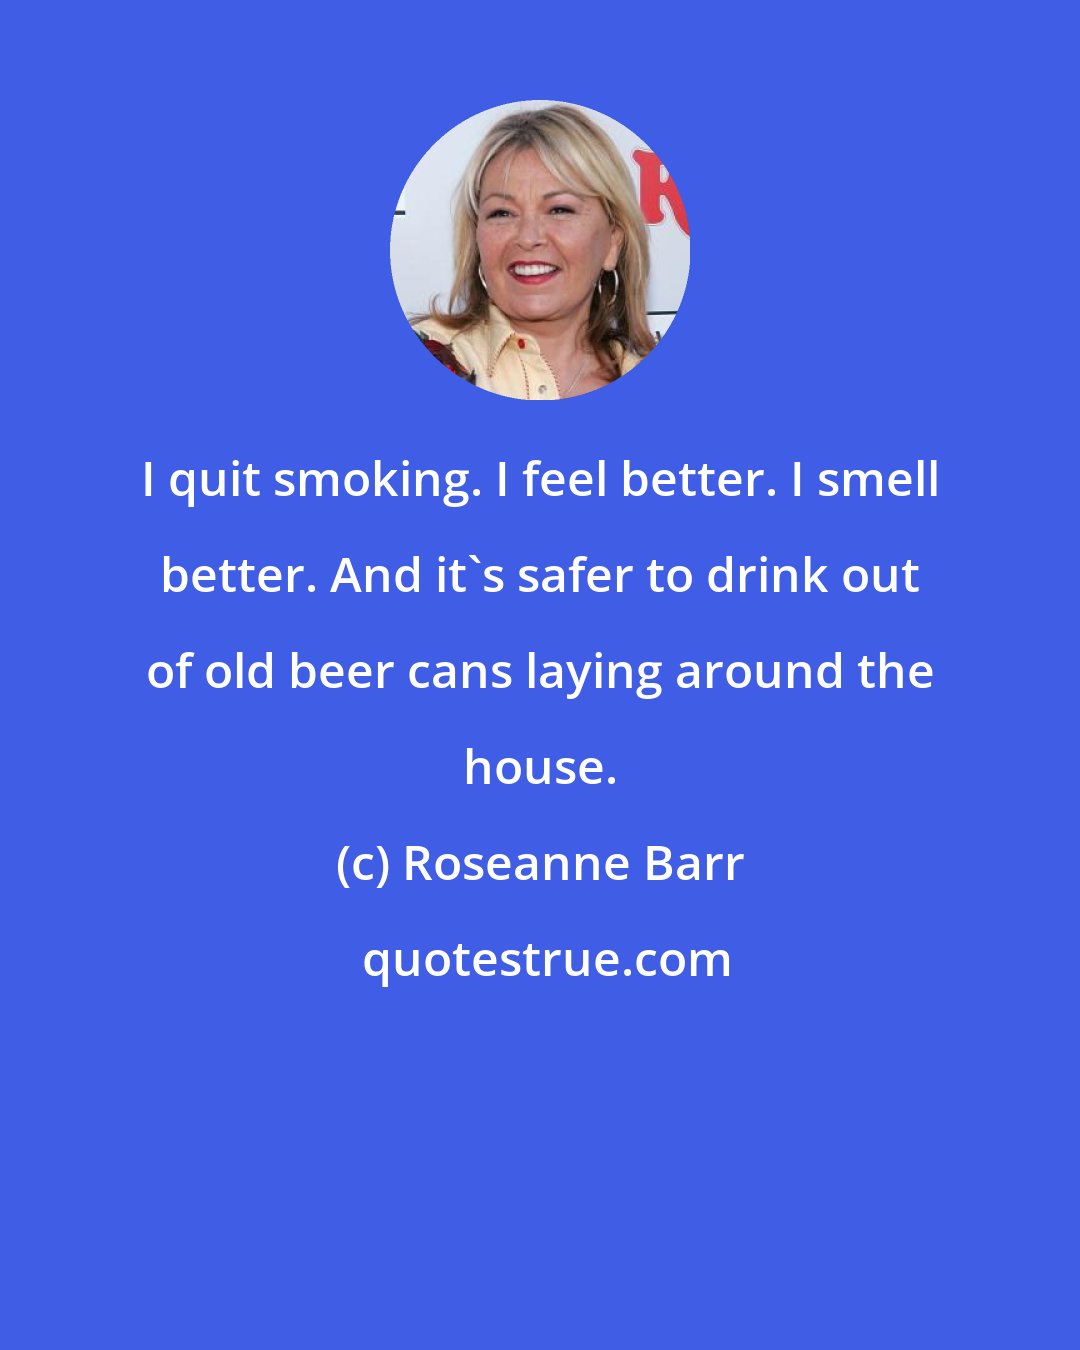 Roseanne Barr: I quit smoking. I feel better. I smell better. And it's safer to drink out of old beer cans laying around the house.